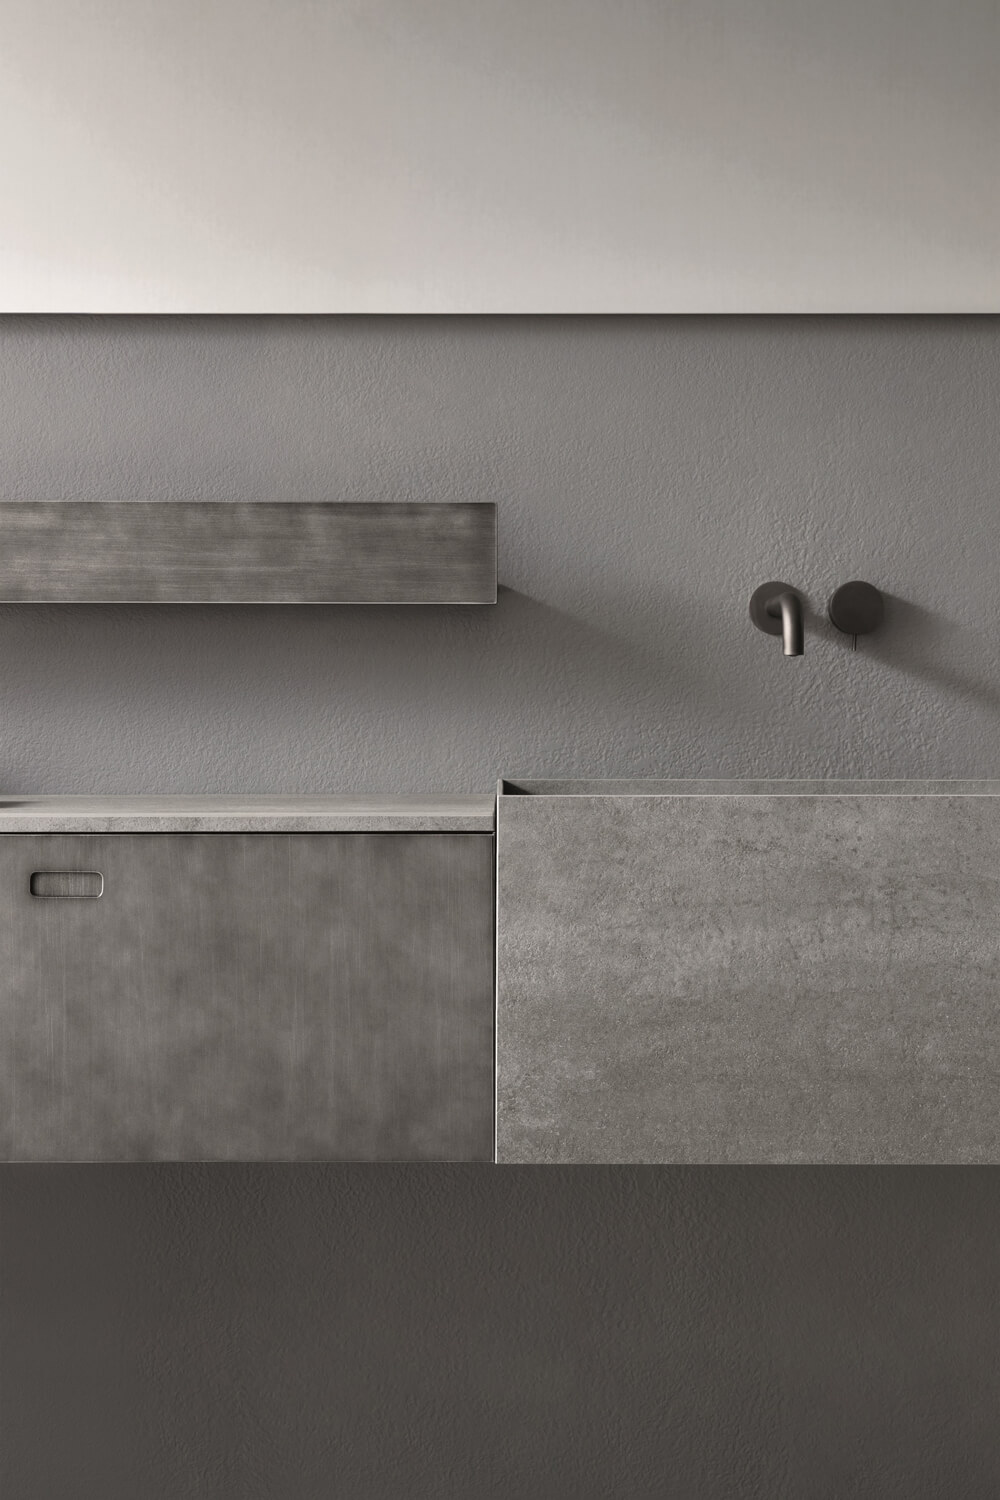 The Acciaio metal finish (cabinets) and Savoia Grigia Laminam (washbasin) provide a contrast in texture within the same color palette.